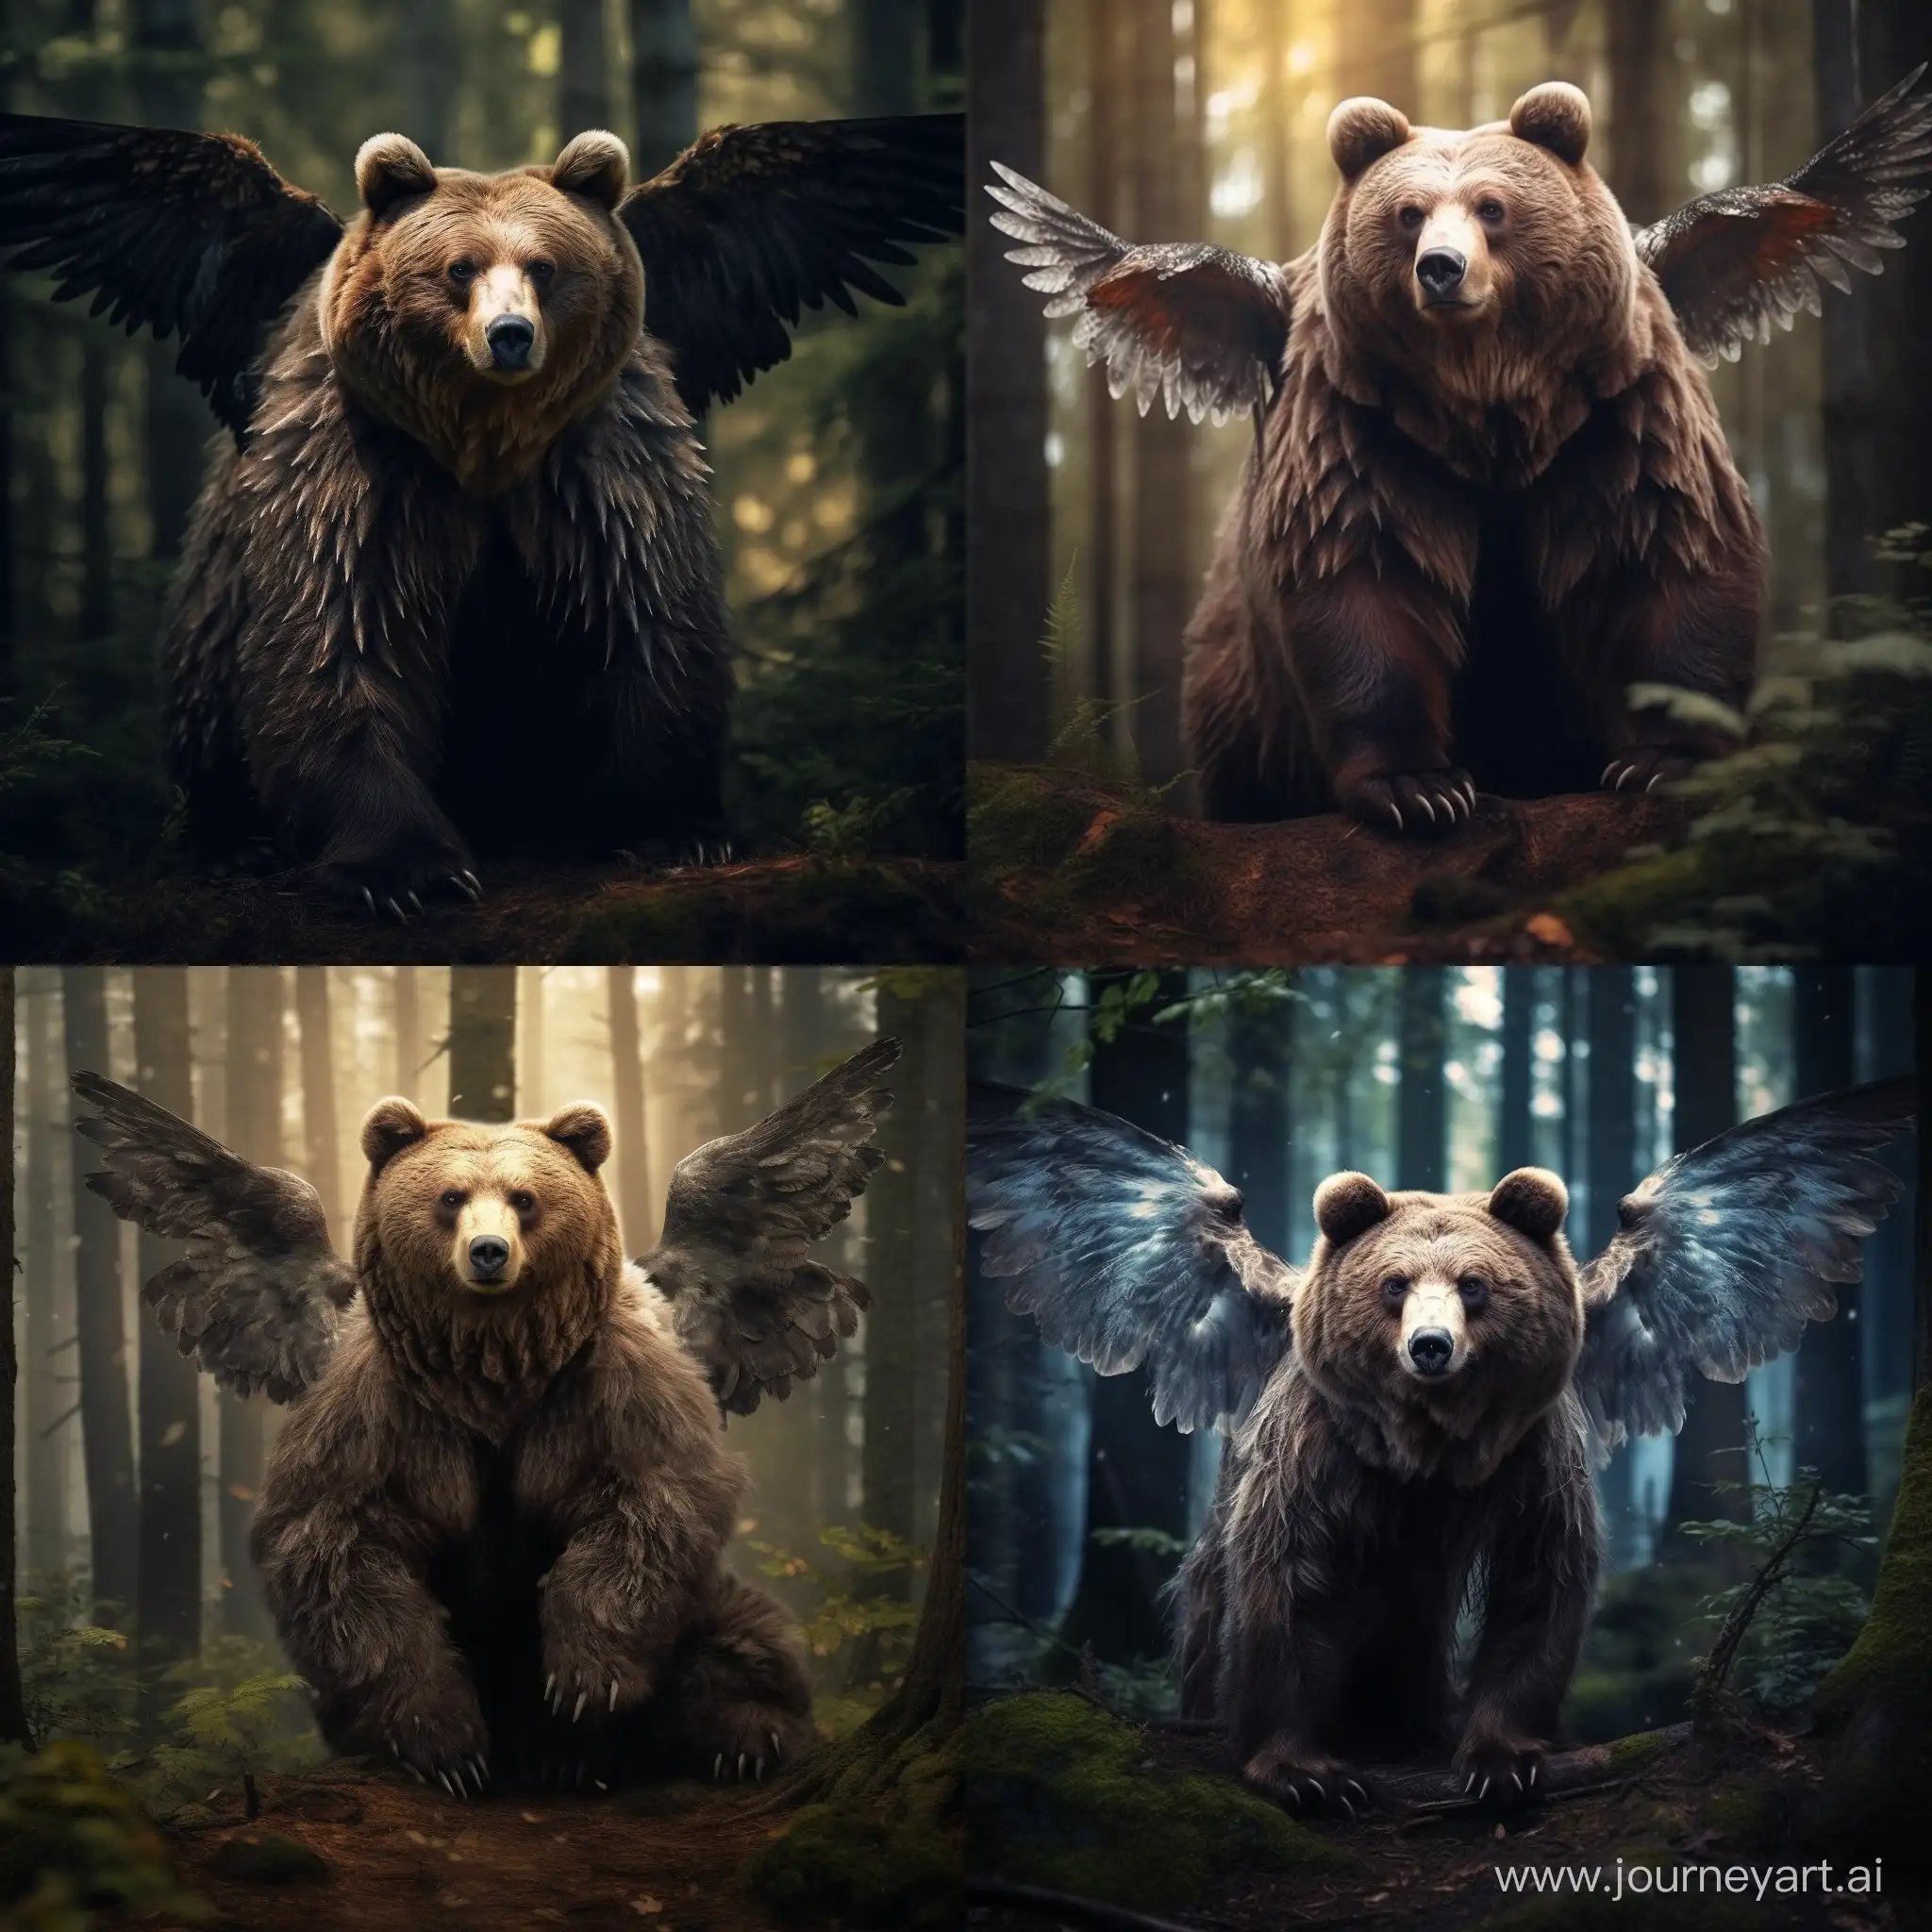 Forest-Wildlife-Bear-with-Owl-Features-in-Realistic-Photograph